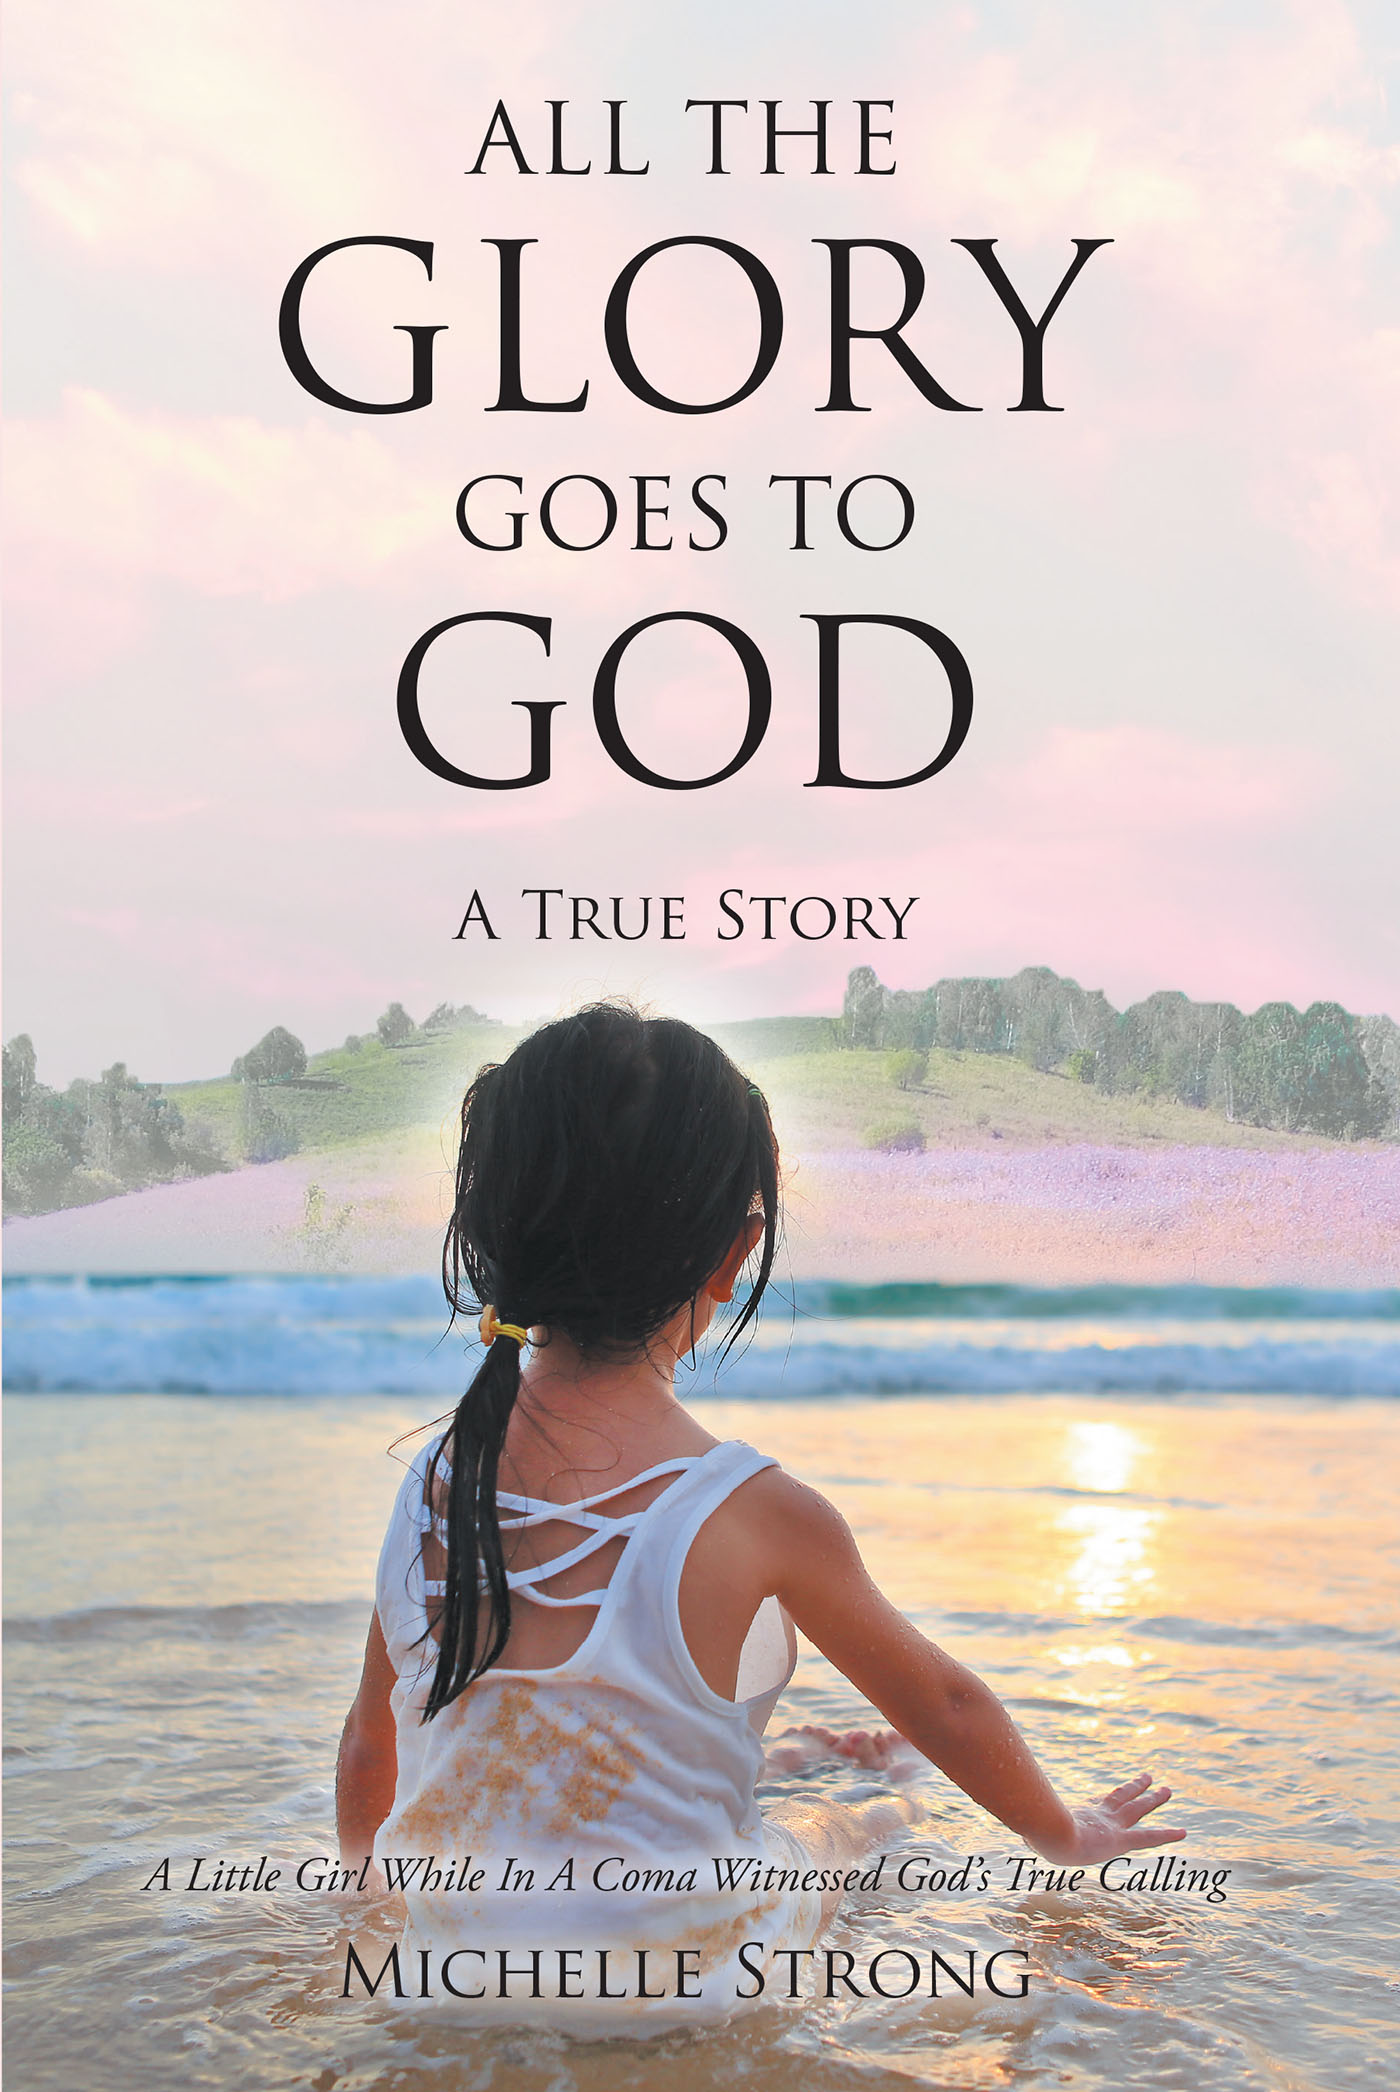 Author Michelle Strong’s Newly Released "All the Glory Goes to God" is a Stirring True Story of a Journey with God Undertaken by the Author as a Child While in a Coma